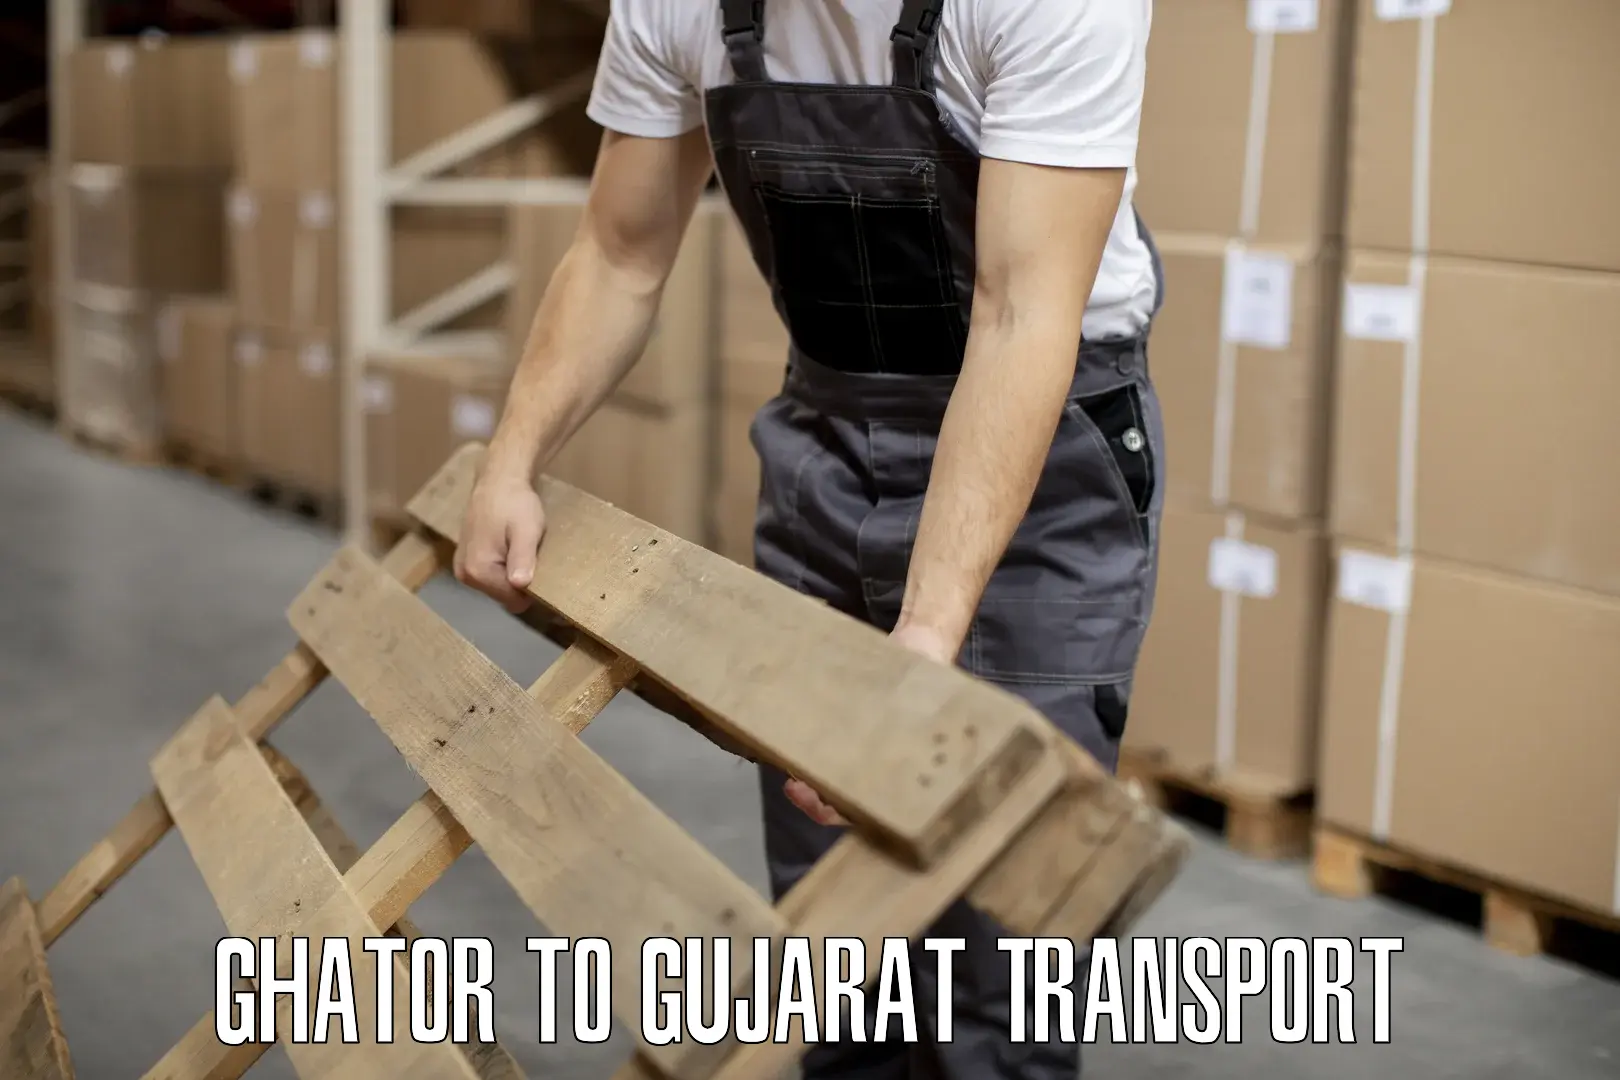 Goods delivery service Ghator to Mundra